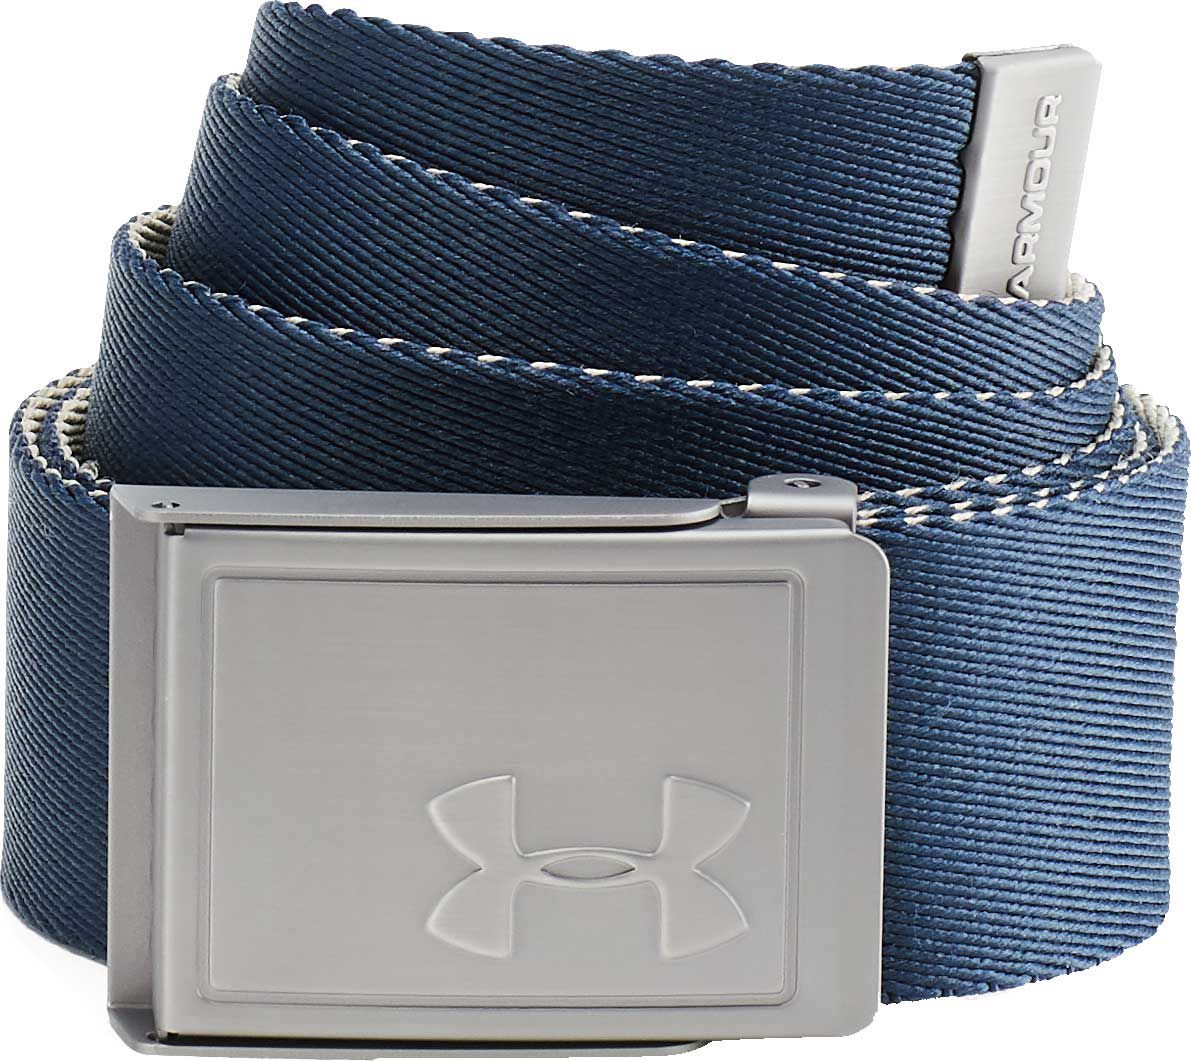 under armour youth golf belt